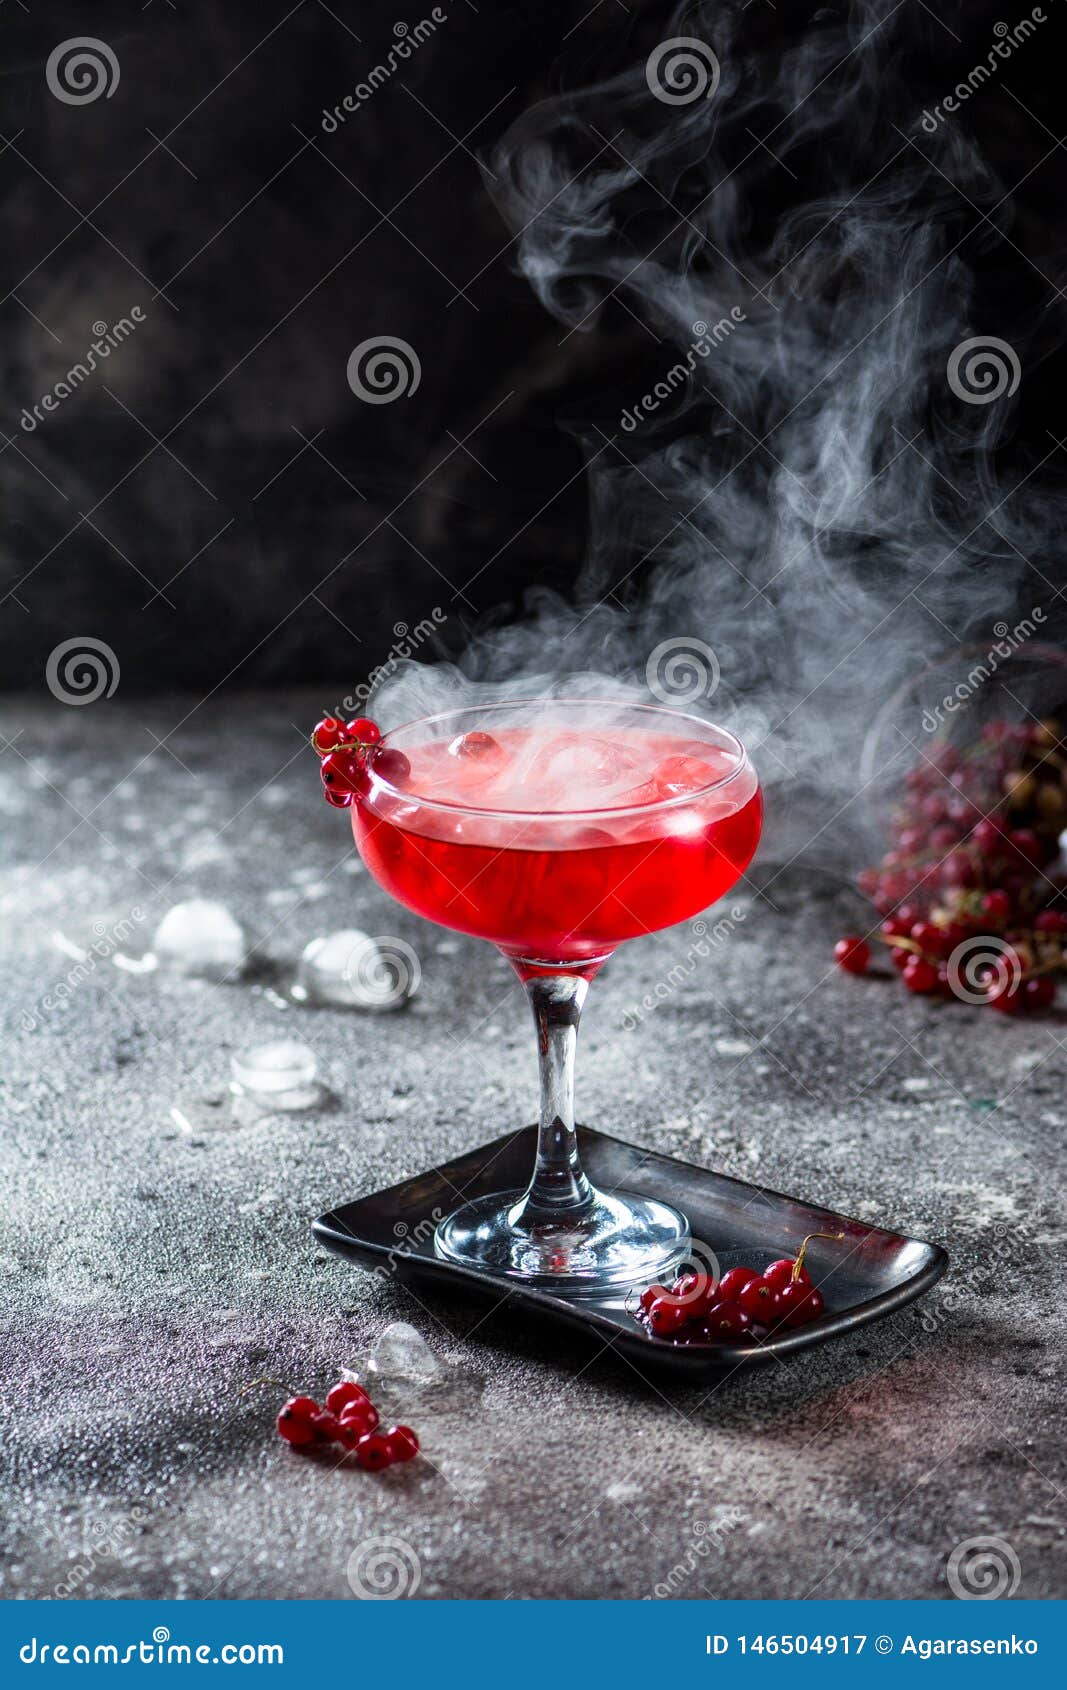 Red Cocktail With Ice Vapor. Cocktail With Smoke. Alcohol Drink, Vodka, Ice, Party, Dry Ice. Stock Image - Image Of Dioxide, Martini: 146504917